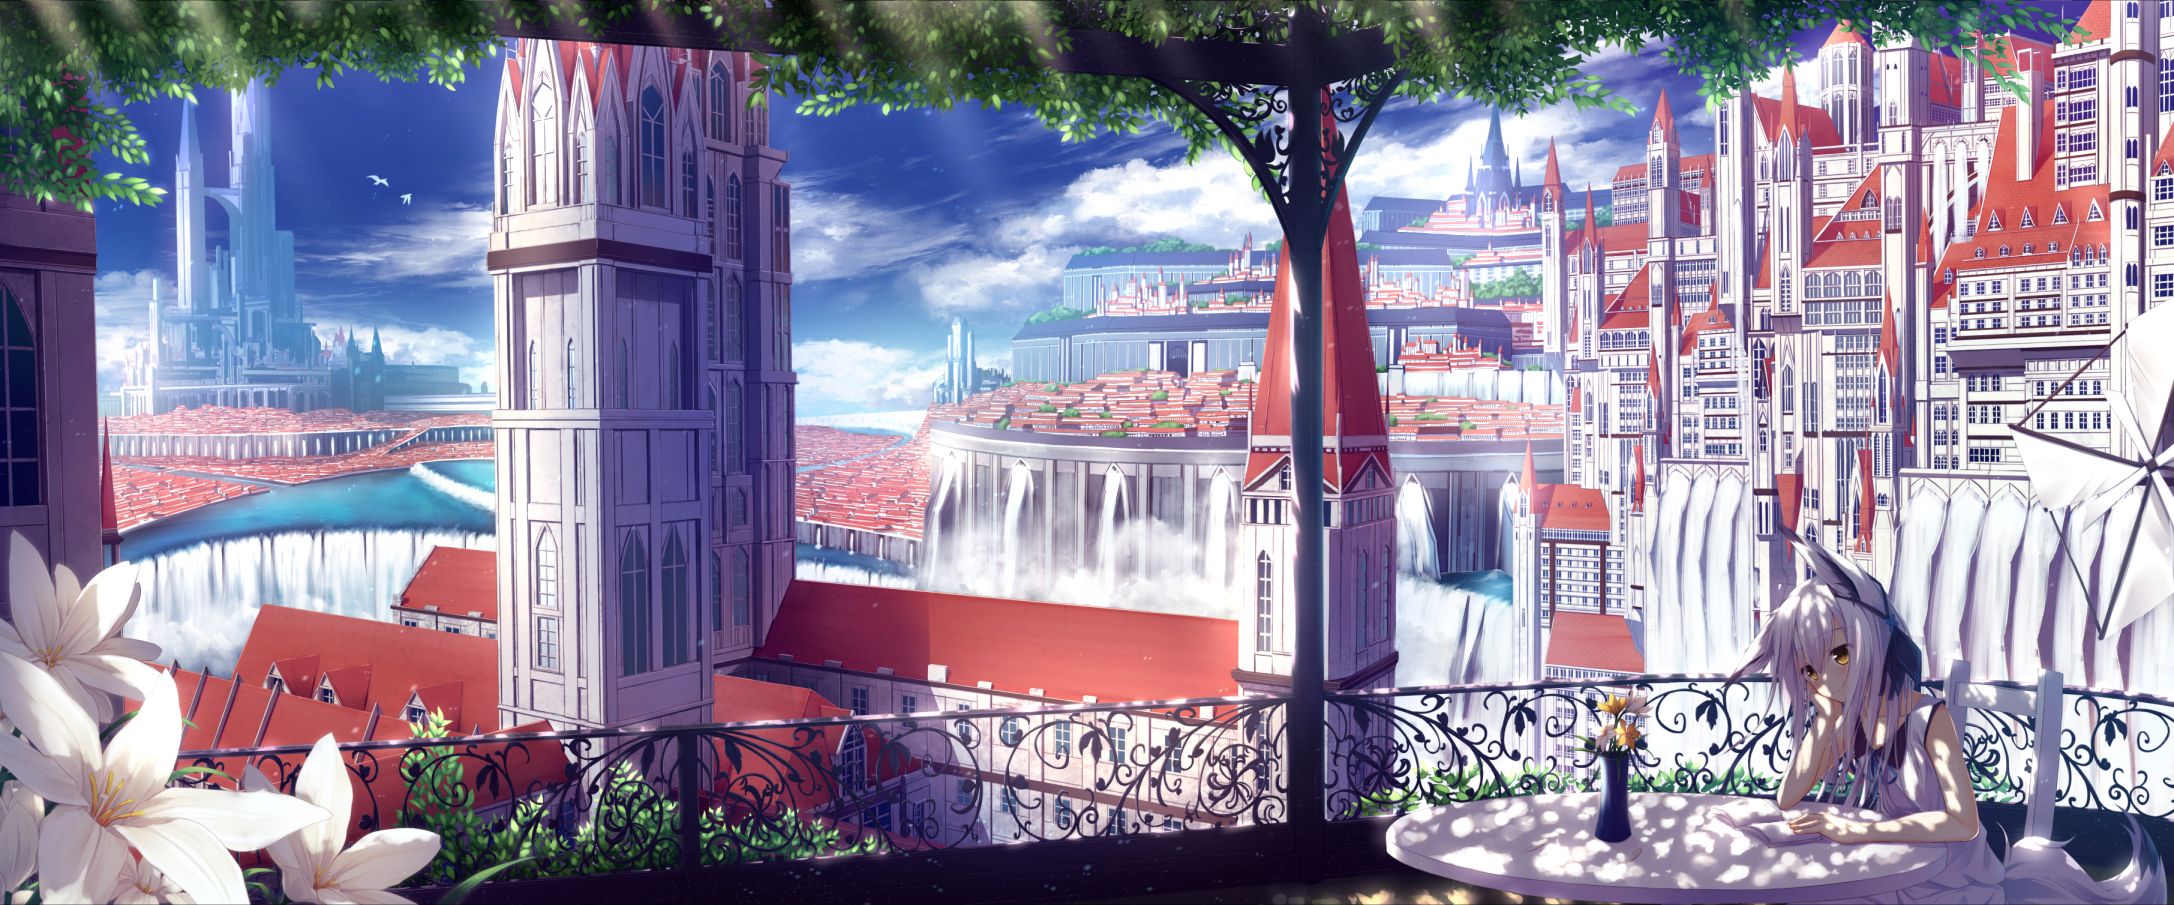 Anime Anime Girls City Water Waterfall Sitting Flowers Plants Fence Table Books Reading Arm Support  2174x905